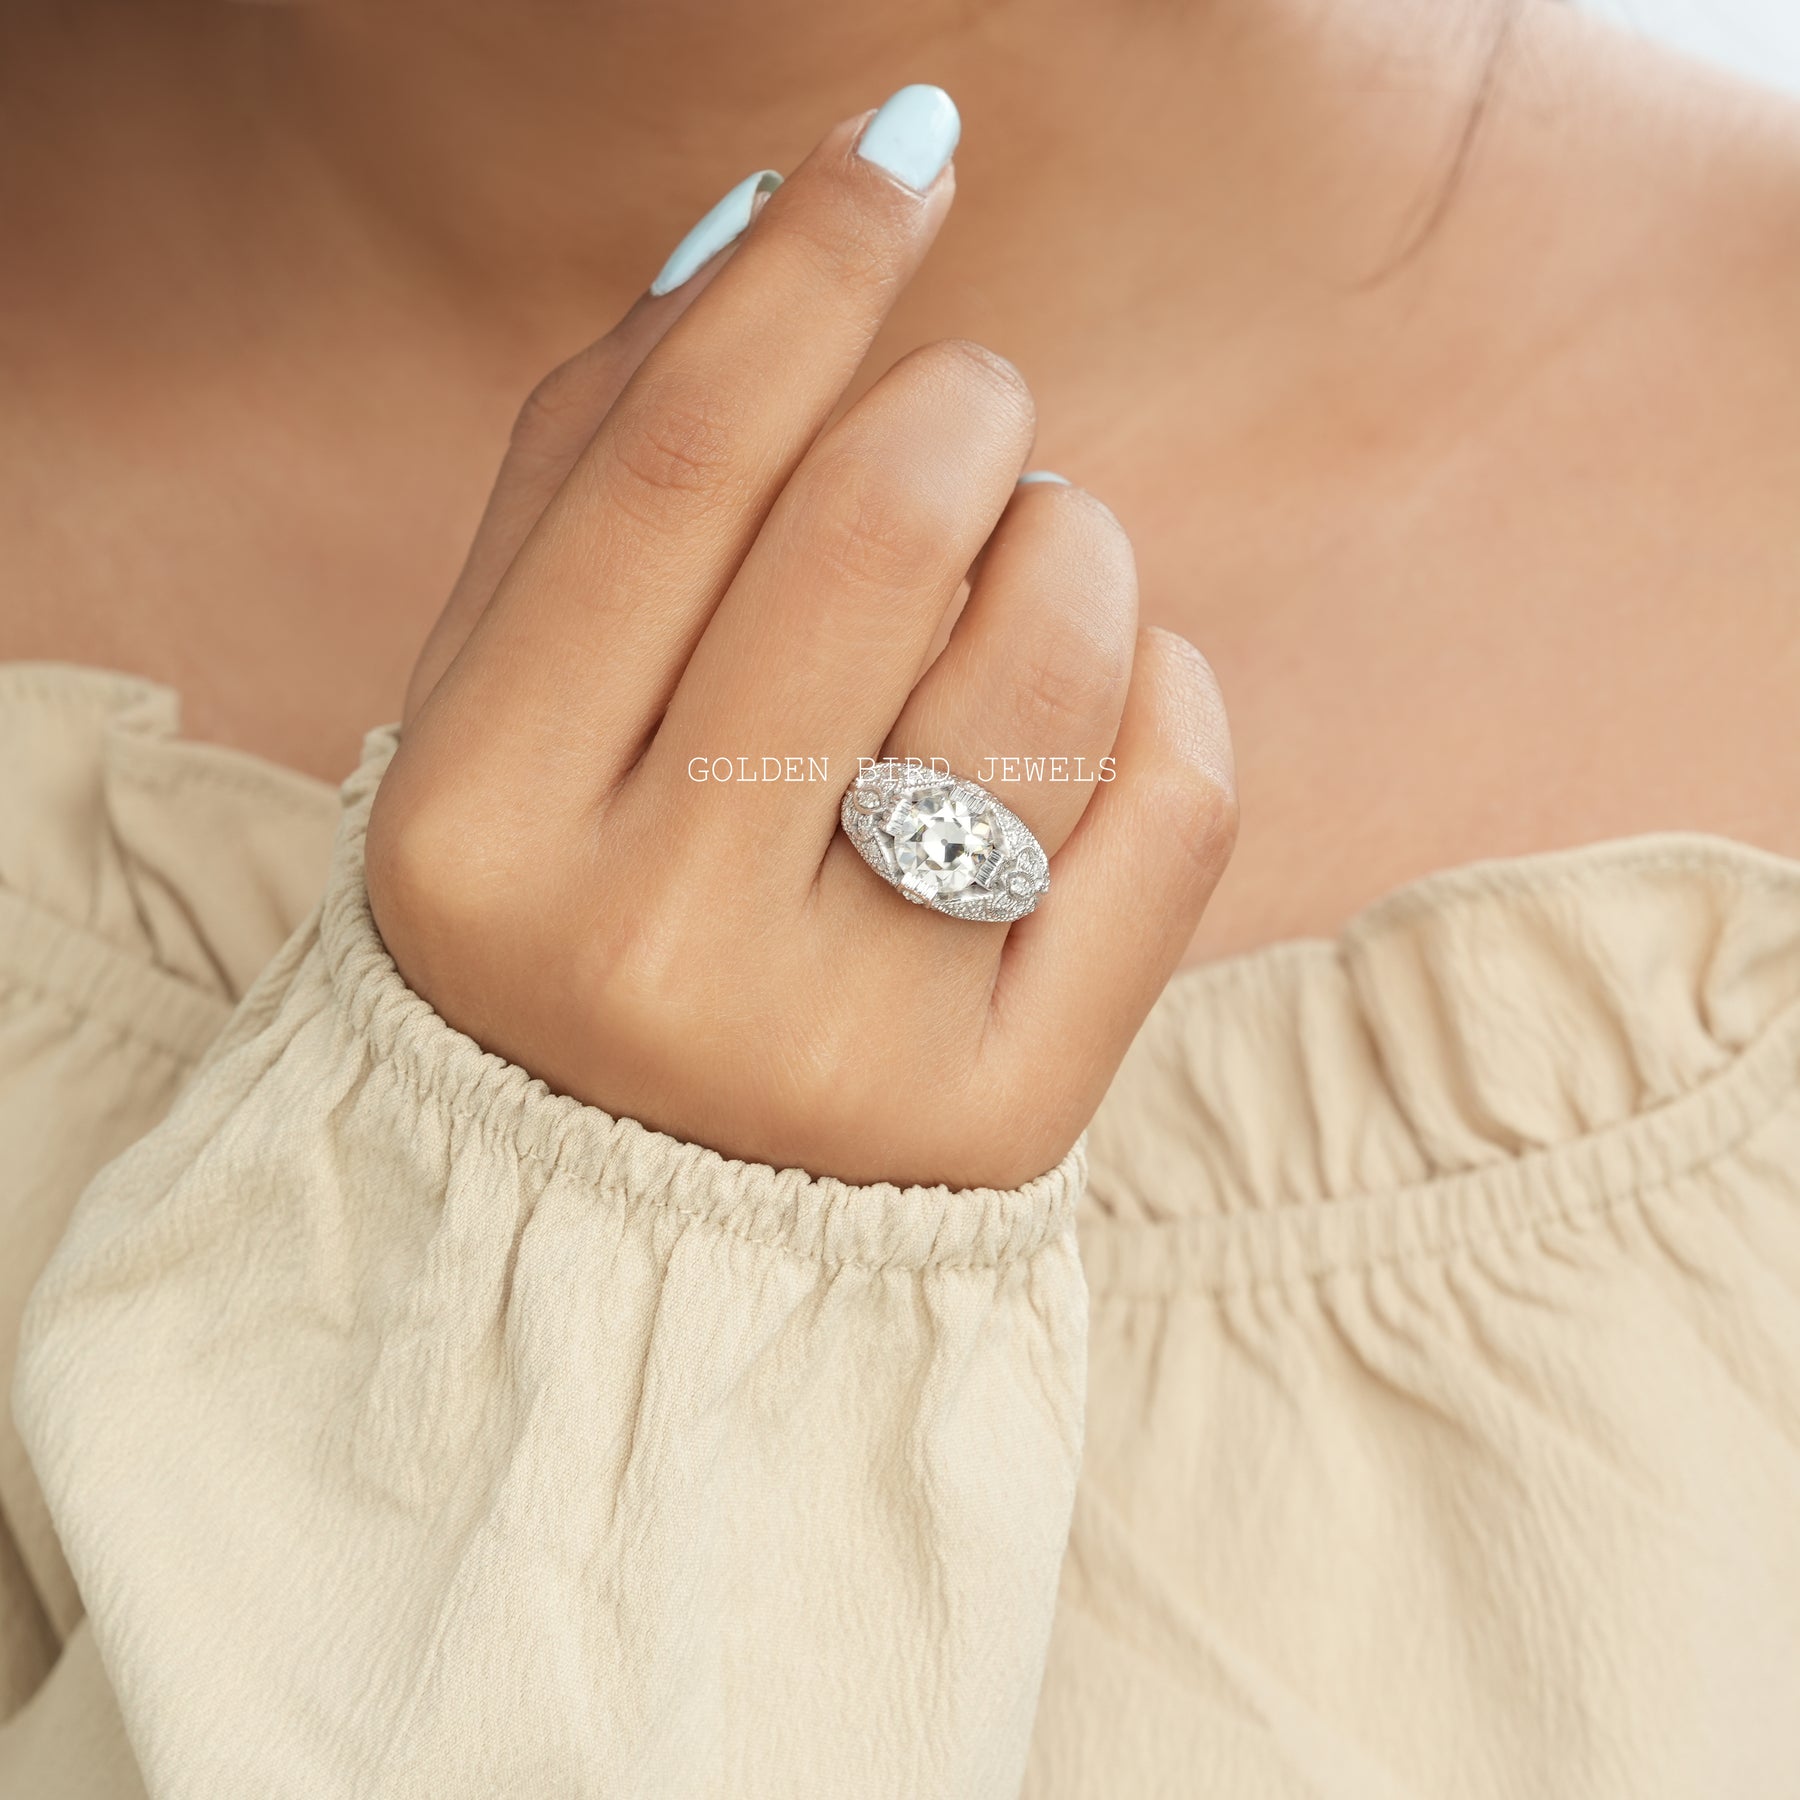 [A woman wearing a white stone moissanite engagement ring]-[Golden Bird Jewels]